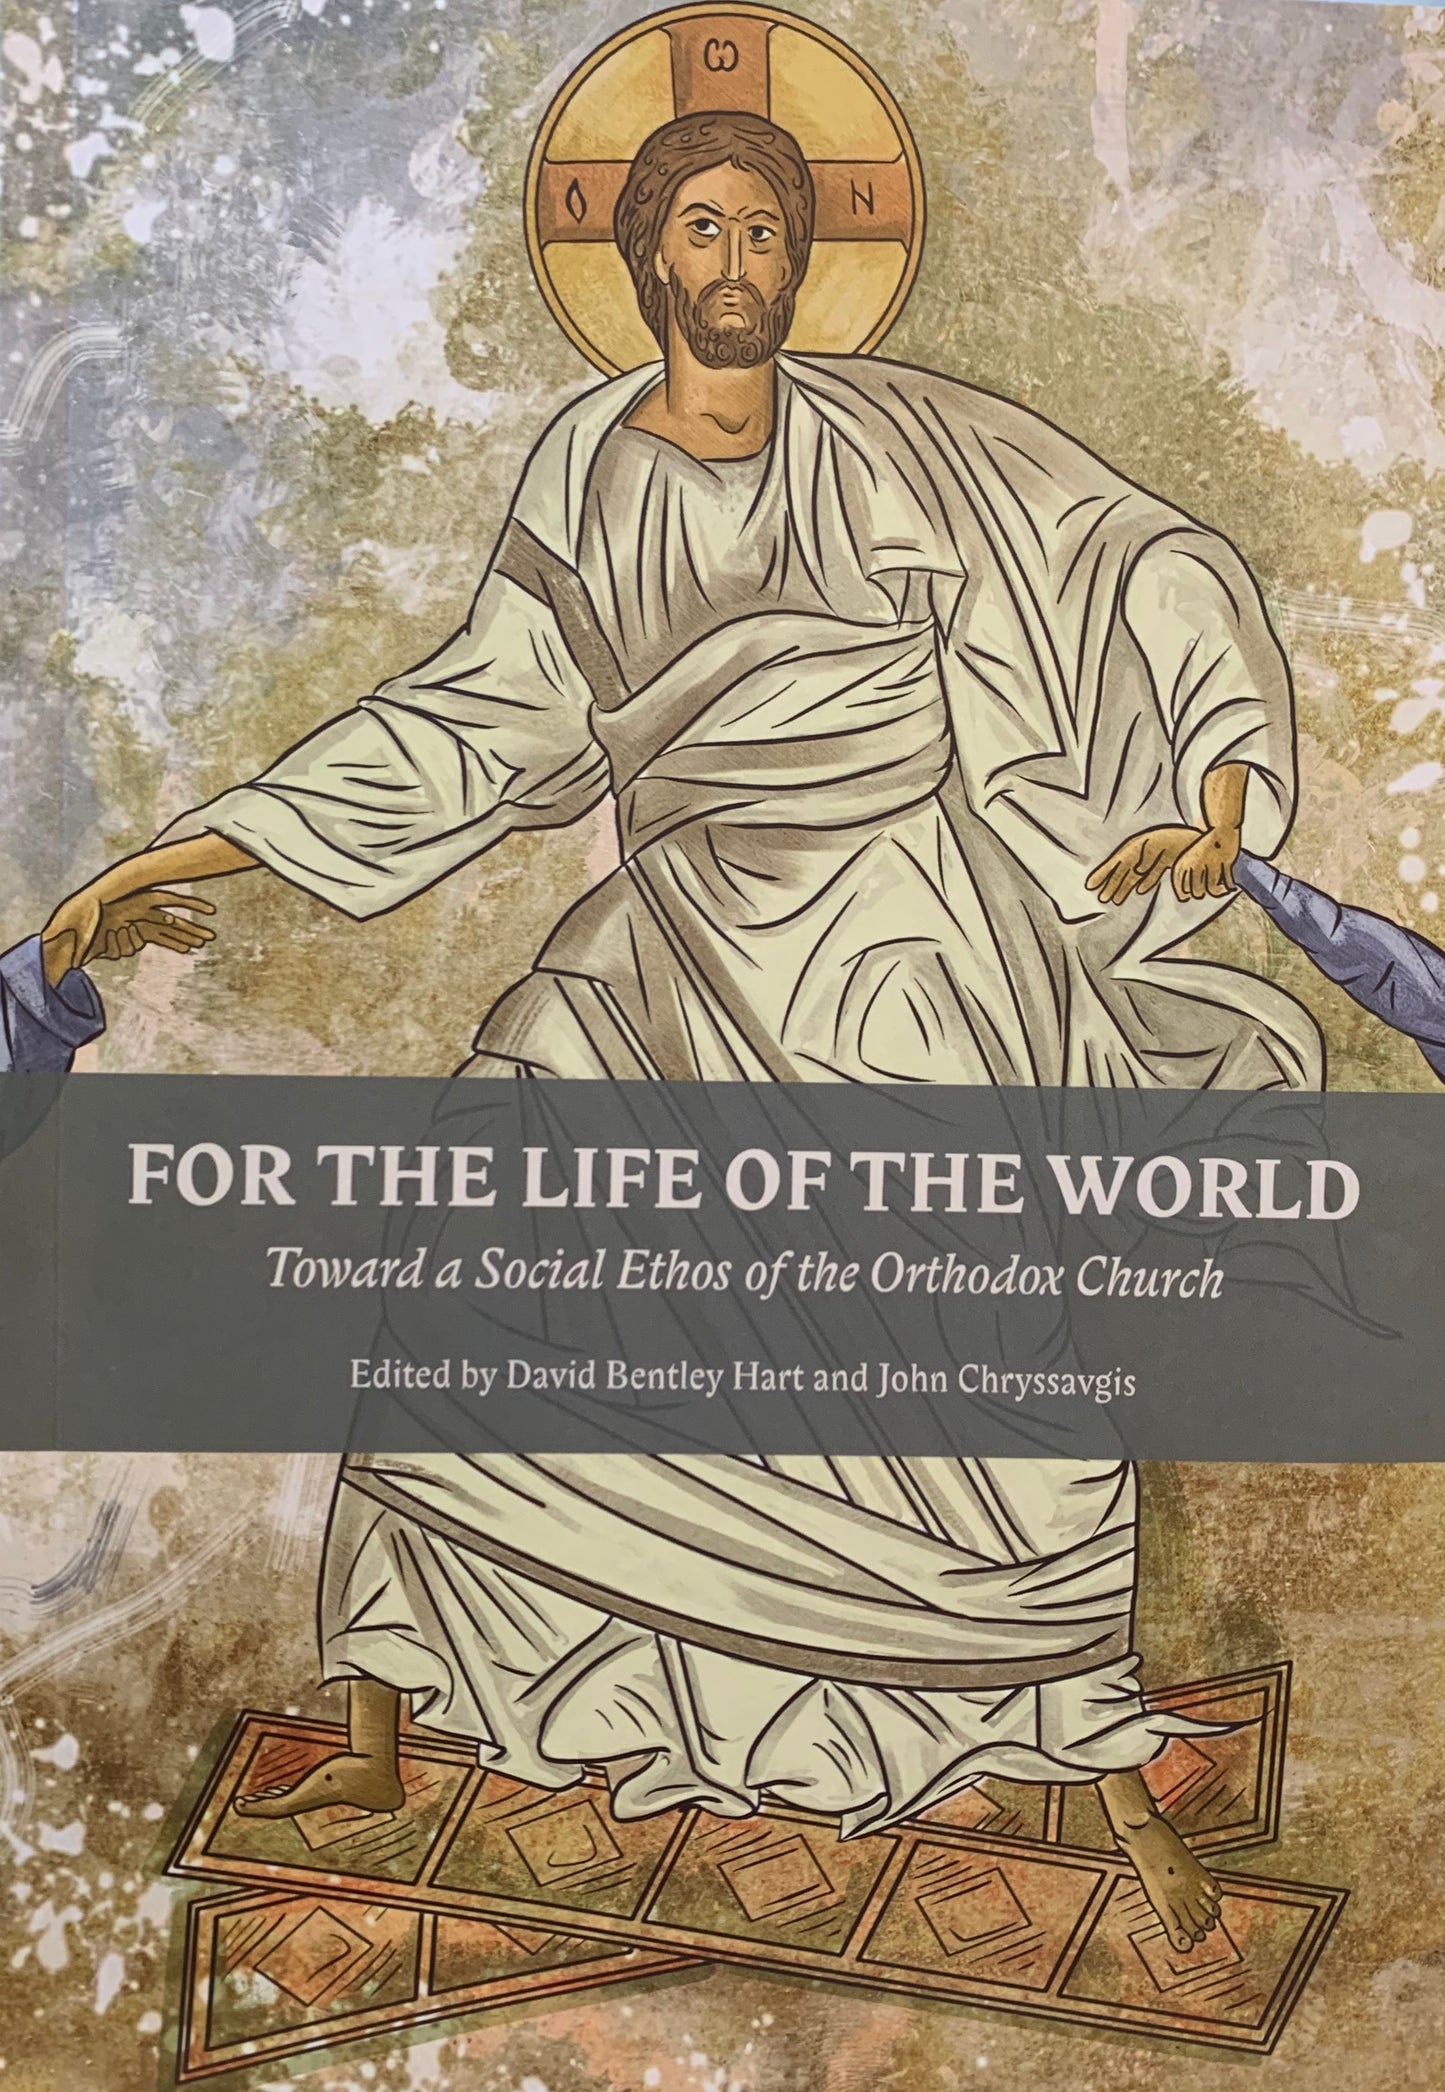 For the Life of the World: Toward a Social Ethos of the Orthodox Church